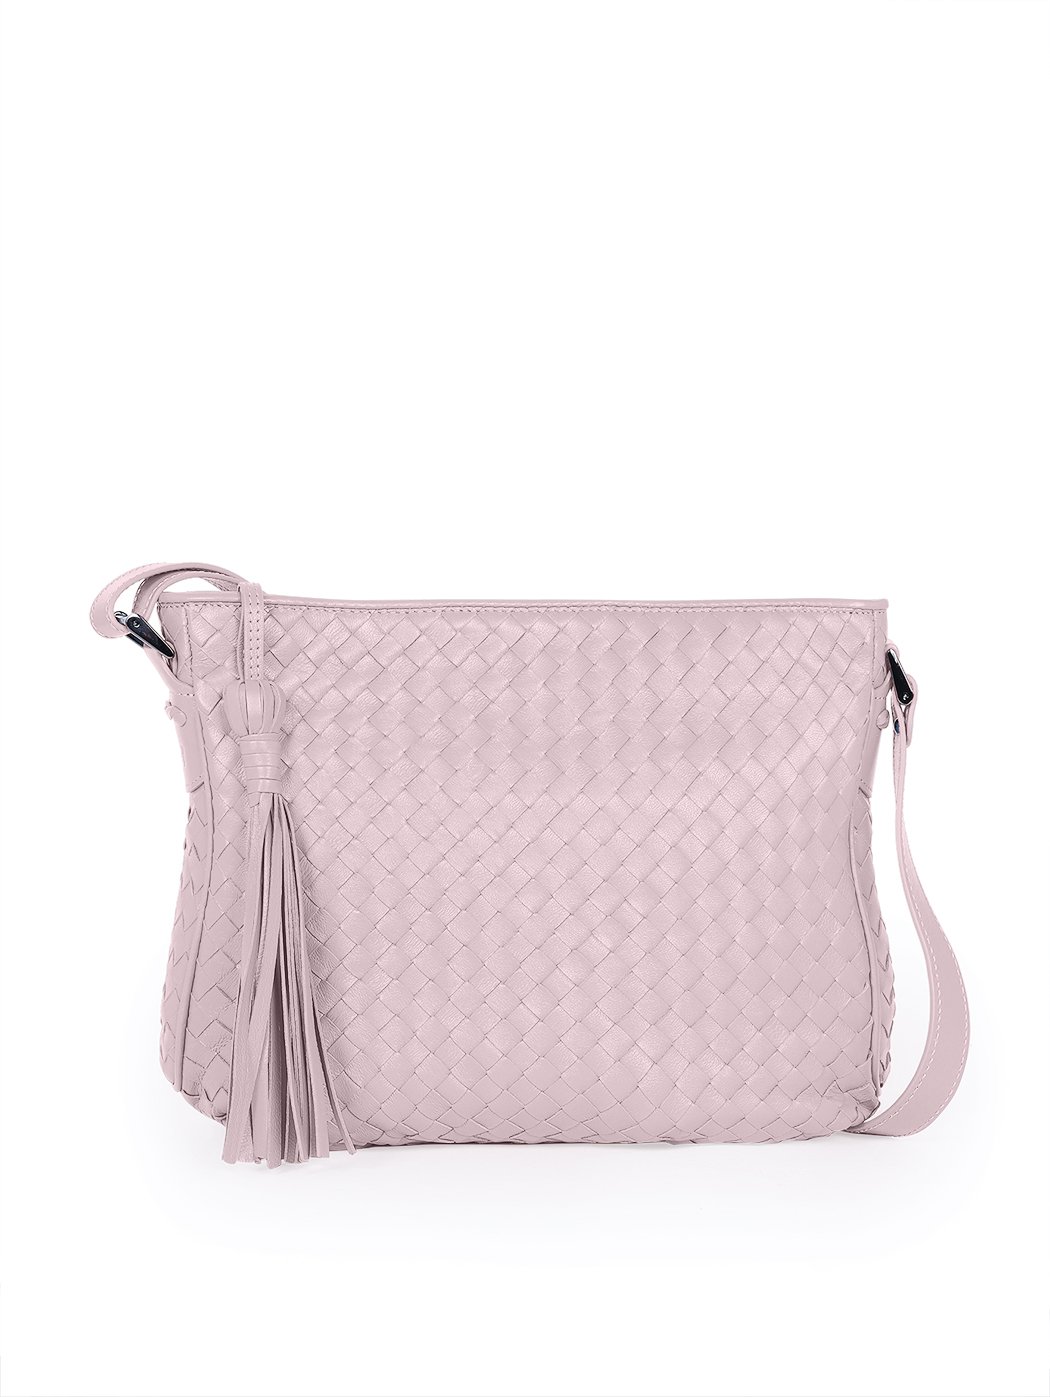 Classic Silhouette Woven Shoulder Bag Pink